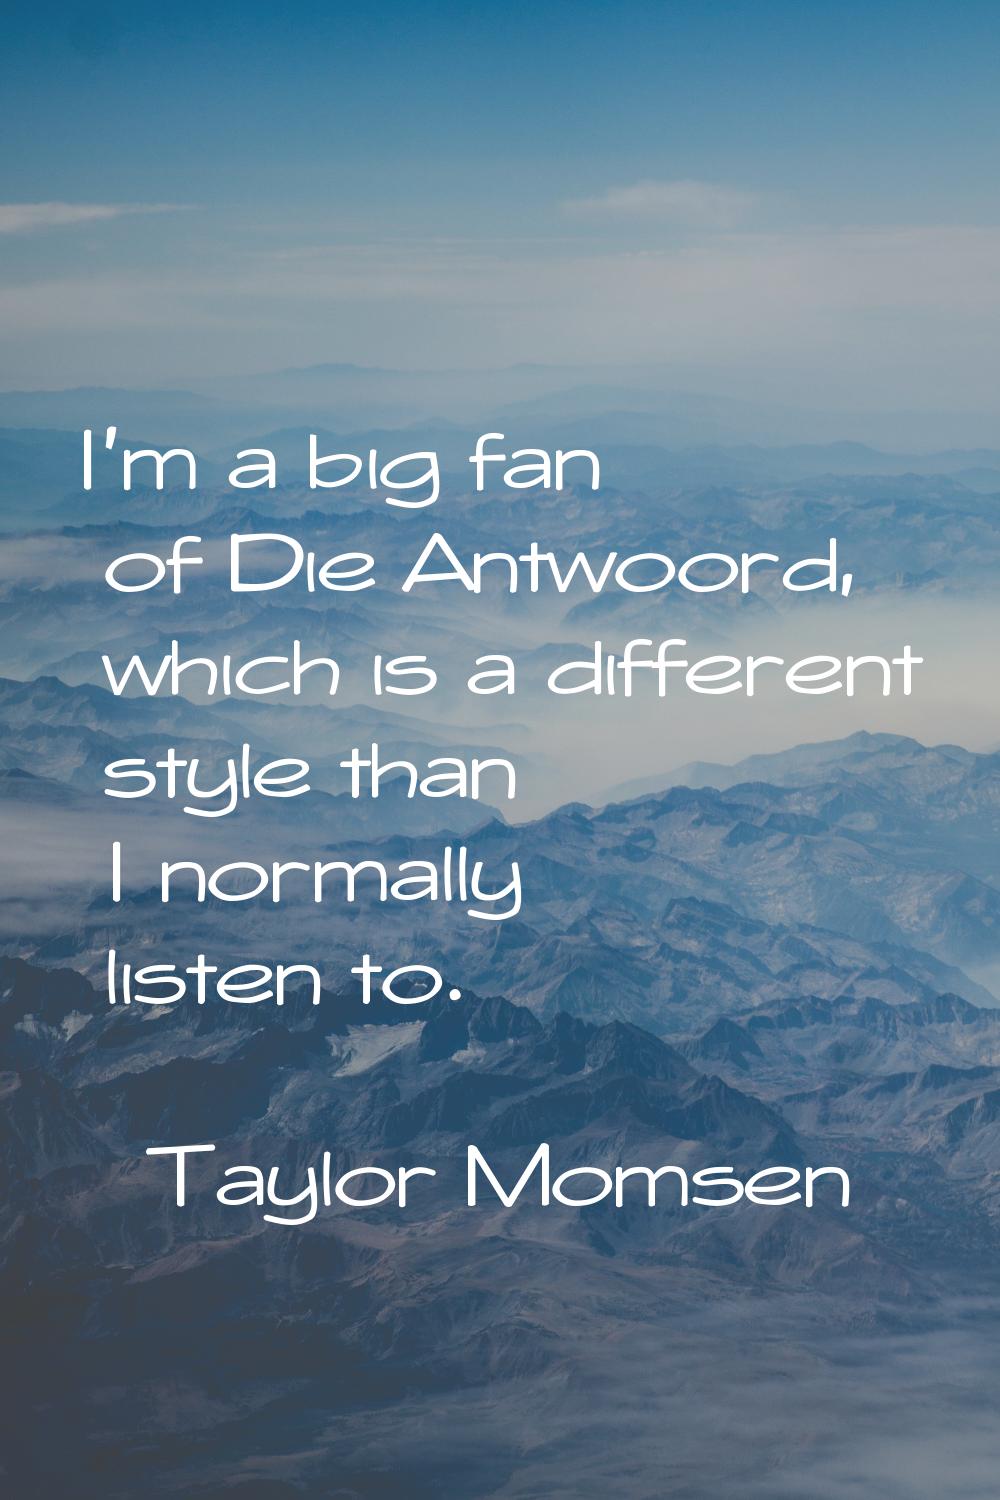 I'm a big fan of Die Antwoord, which is a different style than I normally listen to.